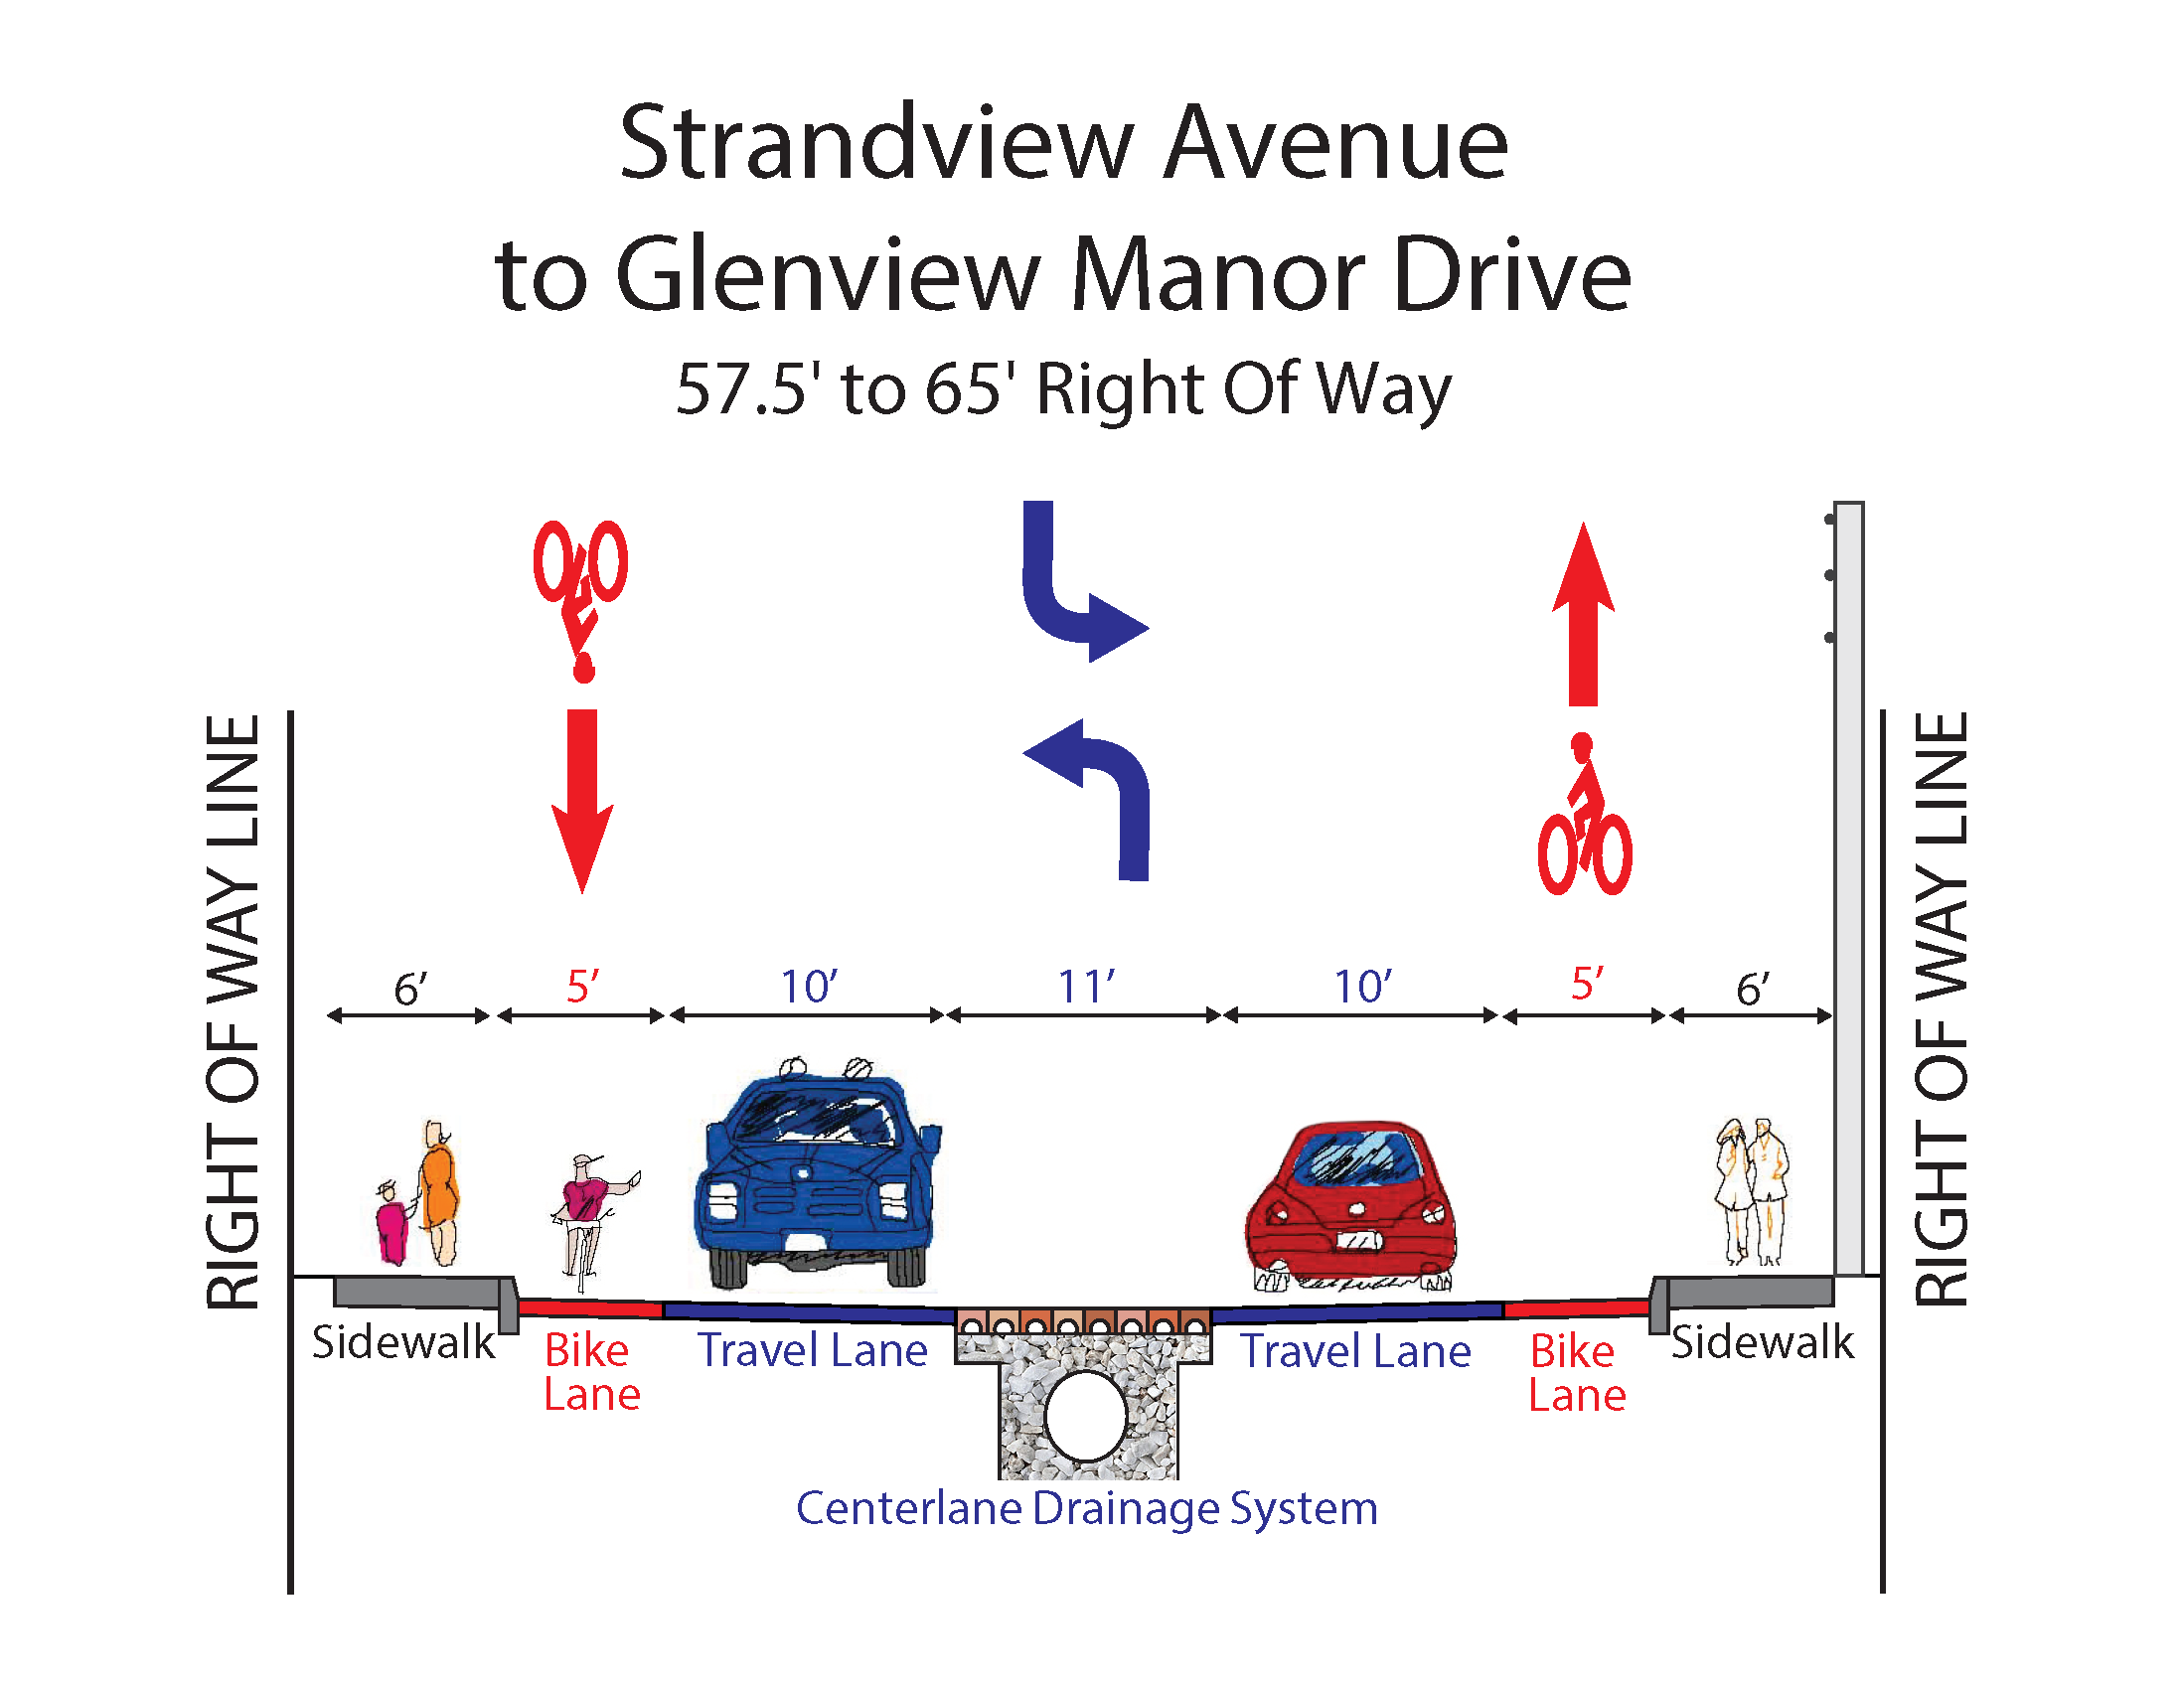 //refreshfmbeach.com/wp-content/uploads/2019/08/Typical-Section-Seg-3-Strandview-Ave-to-Glenview-Manor-Drive.png